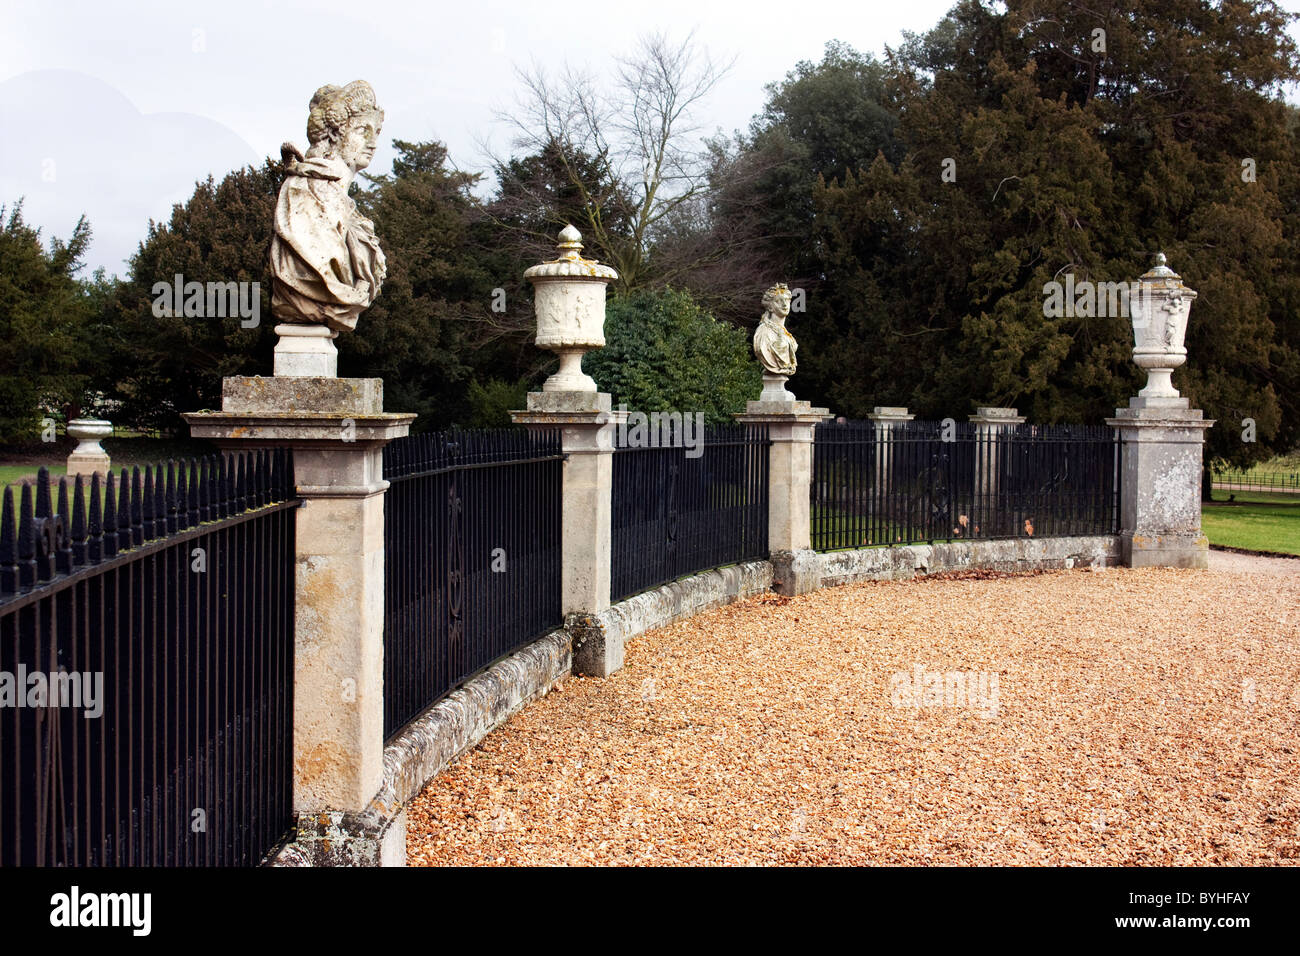 old style statues or busts with iron railings at park Stock Photo